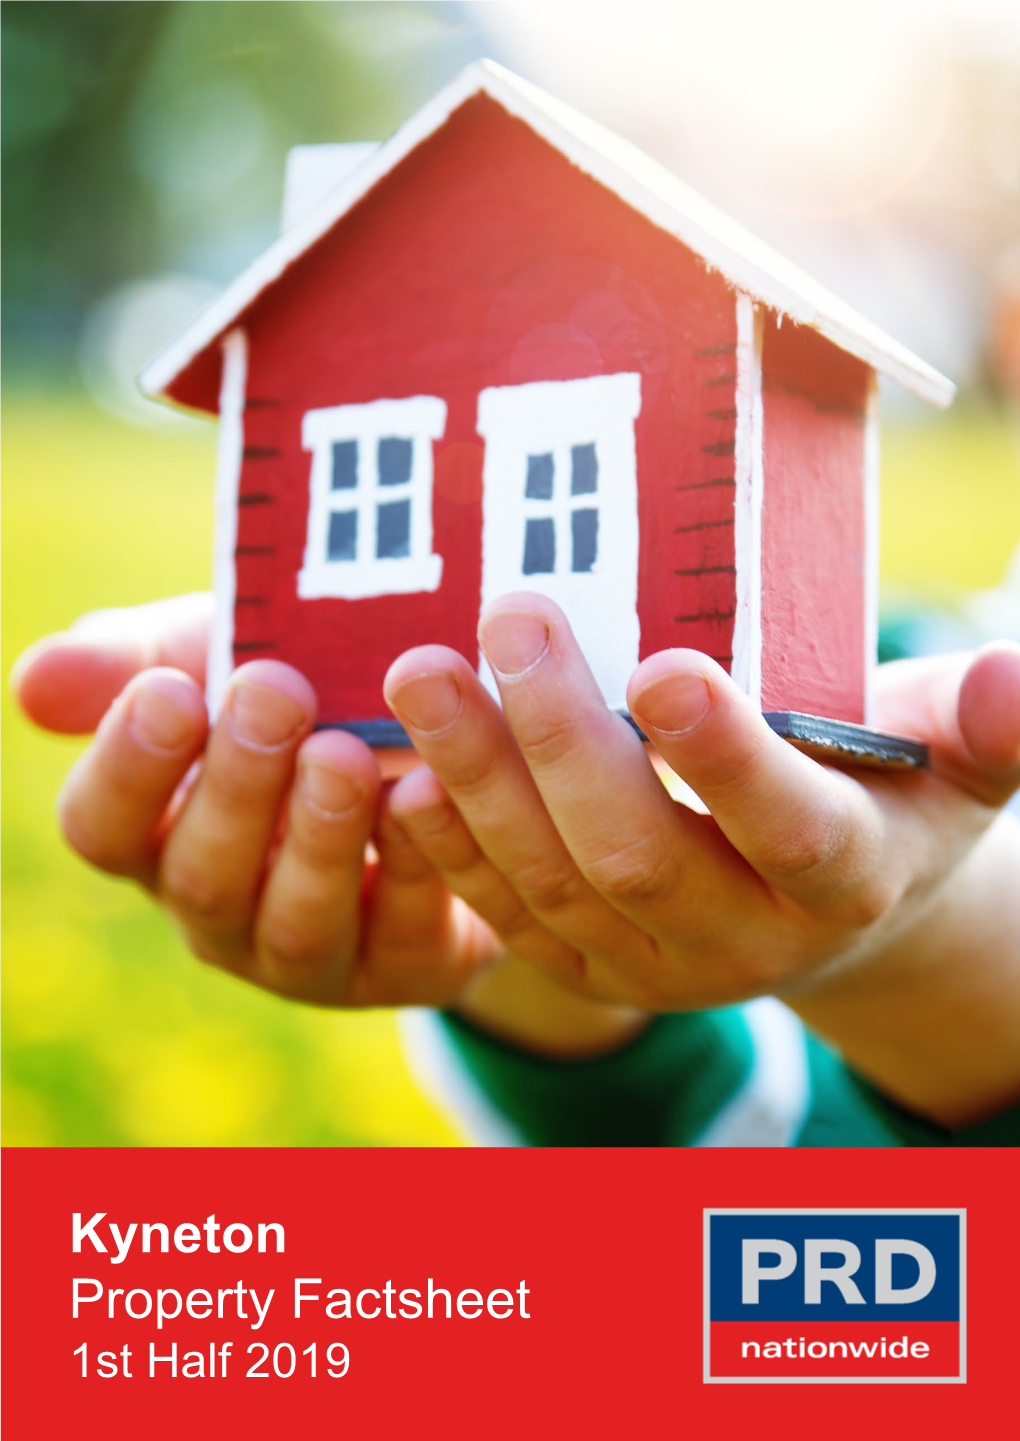 Kyneton Property Factsheet 1St Half 2019 OVERVIEW Located Around 80Km North-West of Melbourne, Kyneton* Is a Town Located Within the Macedon Ranges Region in Victoria